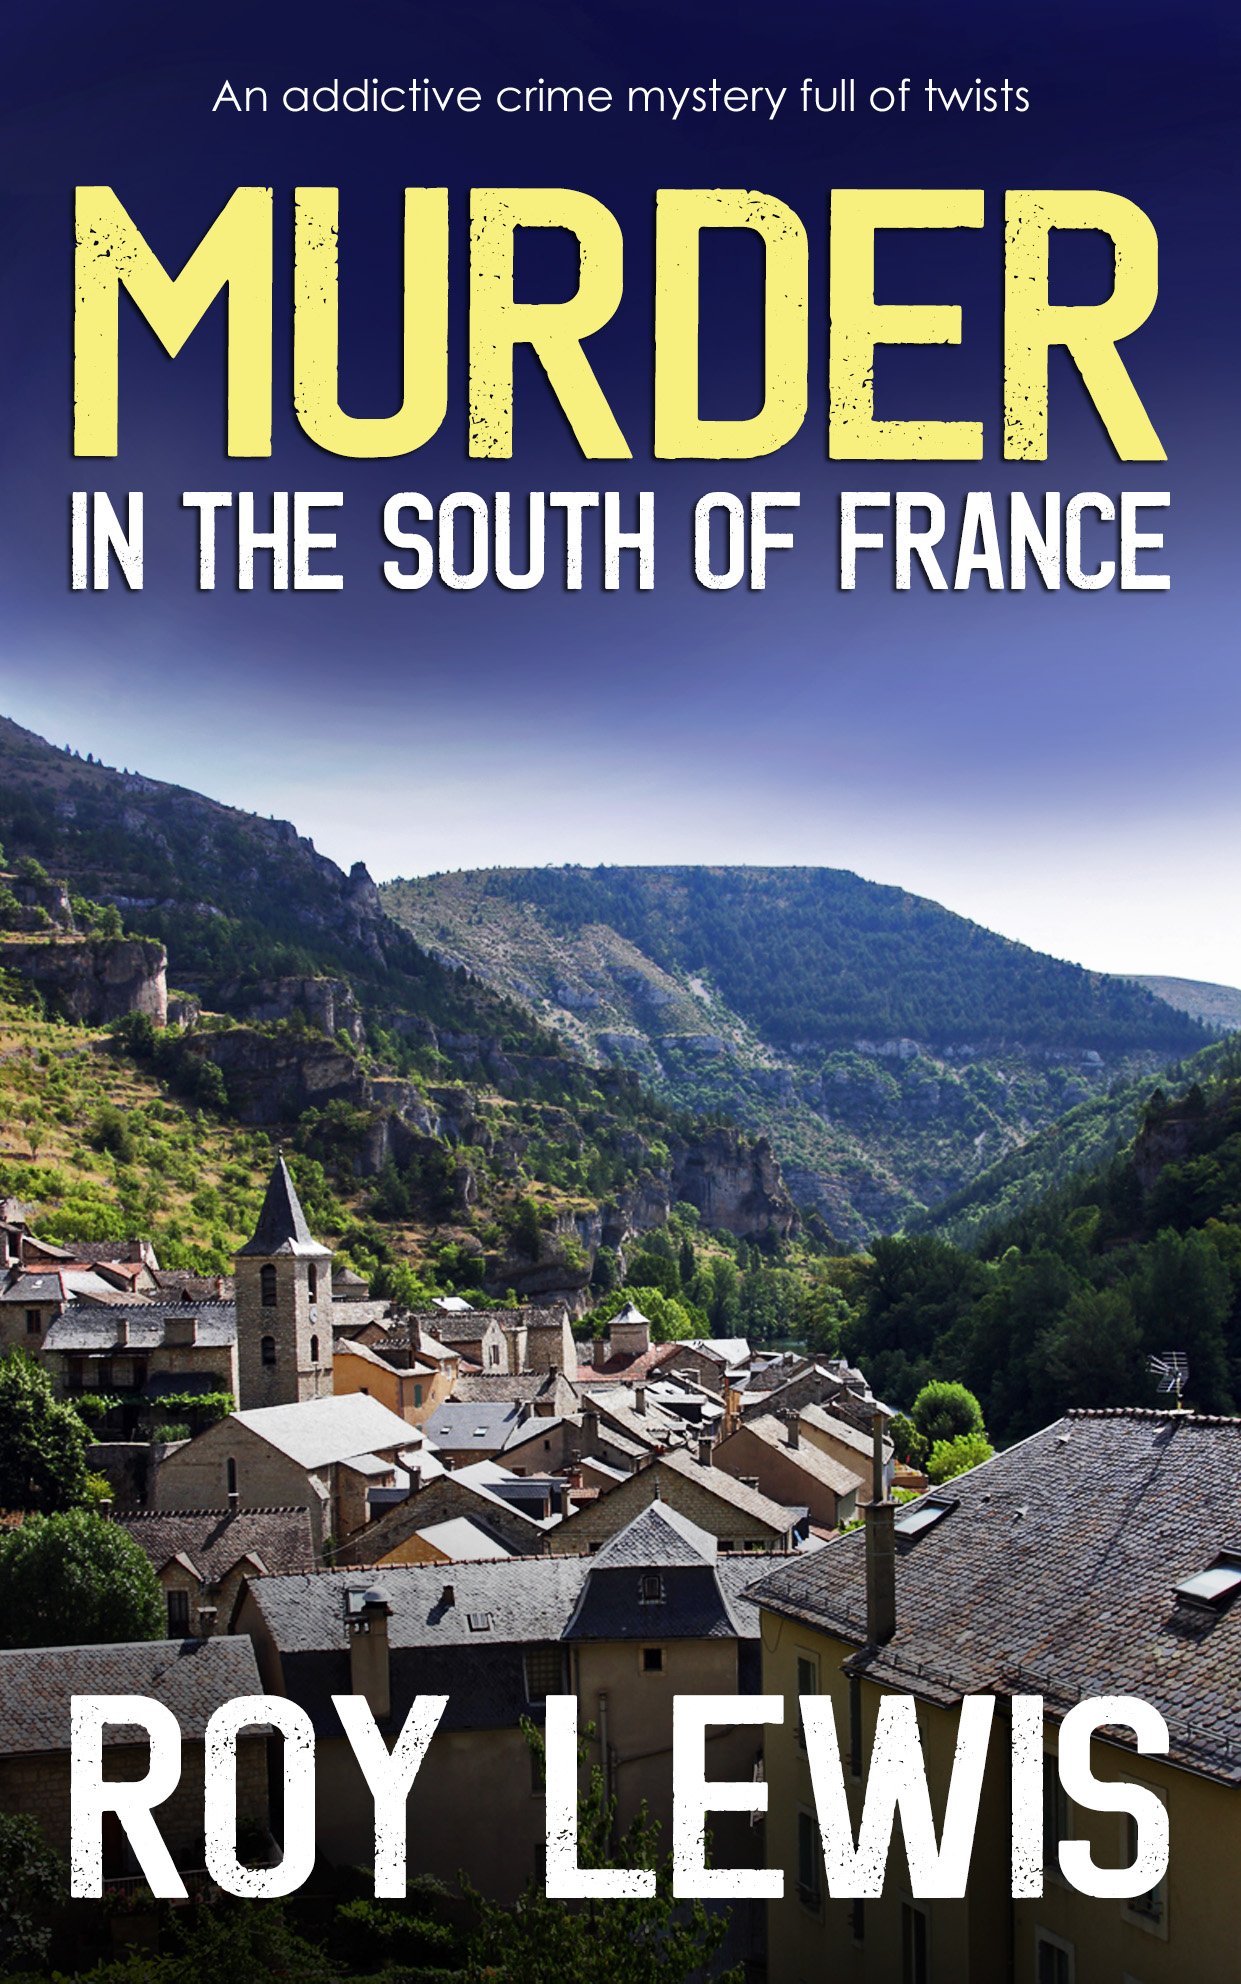 MURDER IN THE SOUTH OF FRANCE Cover publish.jpg